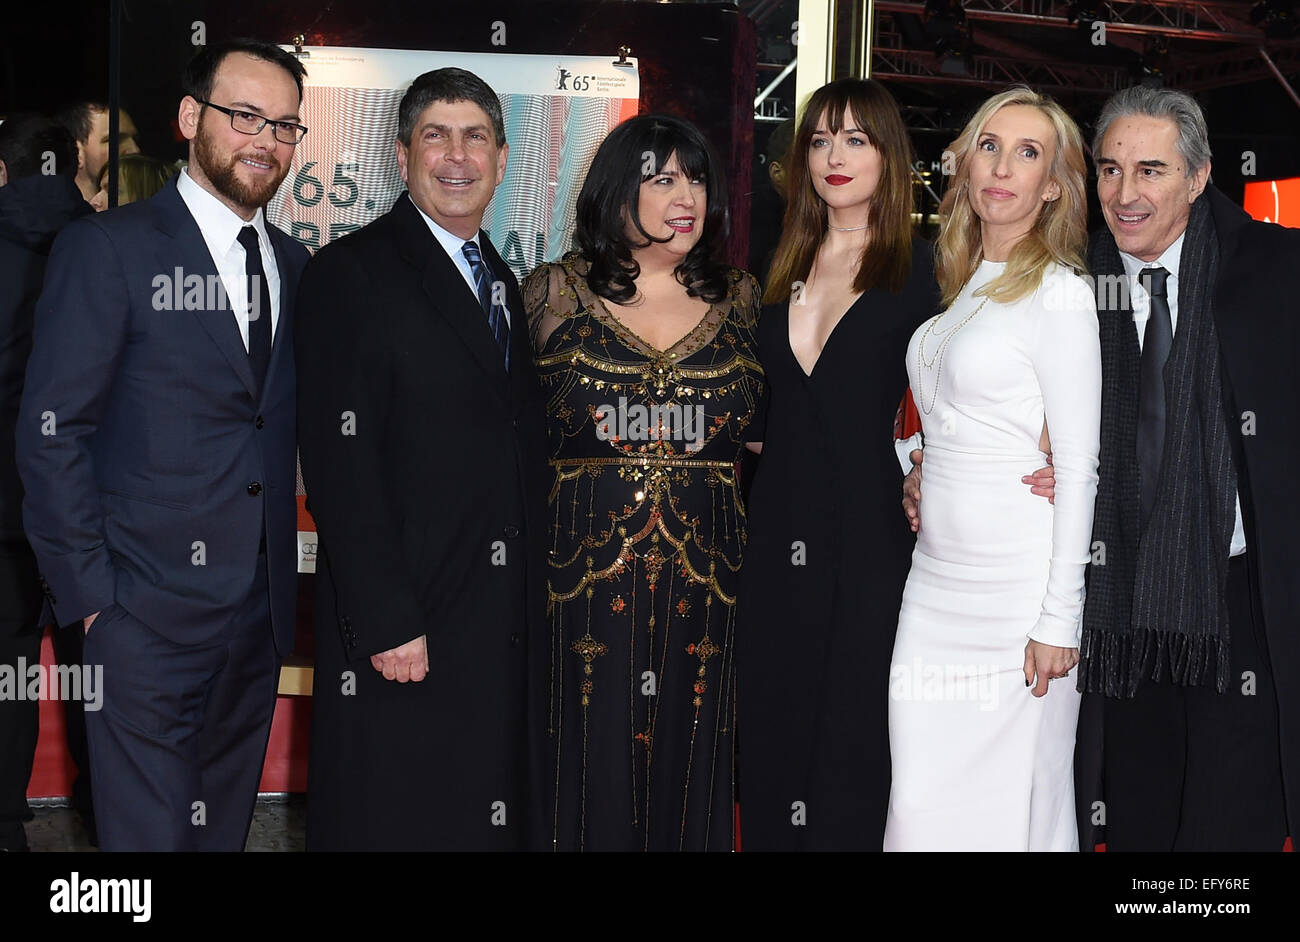 Berlin, Germany. 11th Feb, 2015. Producer Dana Brunetti (l-r), a guest, bestselling author E.L. James, actress Dakota Johnson, director Sam Taylor-Johnson and producer Marcus Viscidi arrive at the world premiere of the film 'Fifty Shades of Grey' during the 65th annual Berlin Film Festival, in Berlin, Germany, 11 February 2015. The movie is presented out of competition at the Berlinale, which runs from 05 to 15 February 2015. Photo: Britta Pedersen/dpa (recrop)/dpa/Alamy Live News Credit:  dpa picture alliance/Alamy Live News Stock Photo